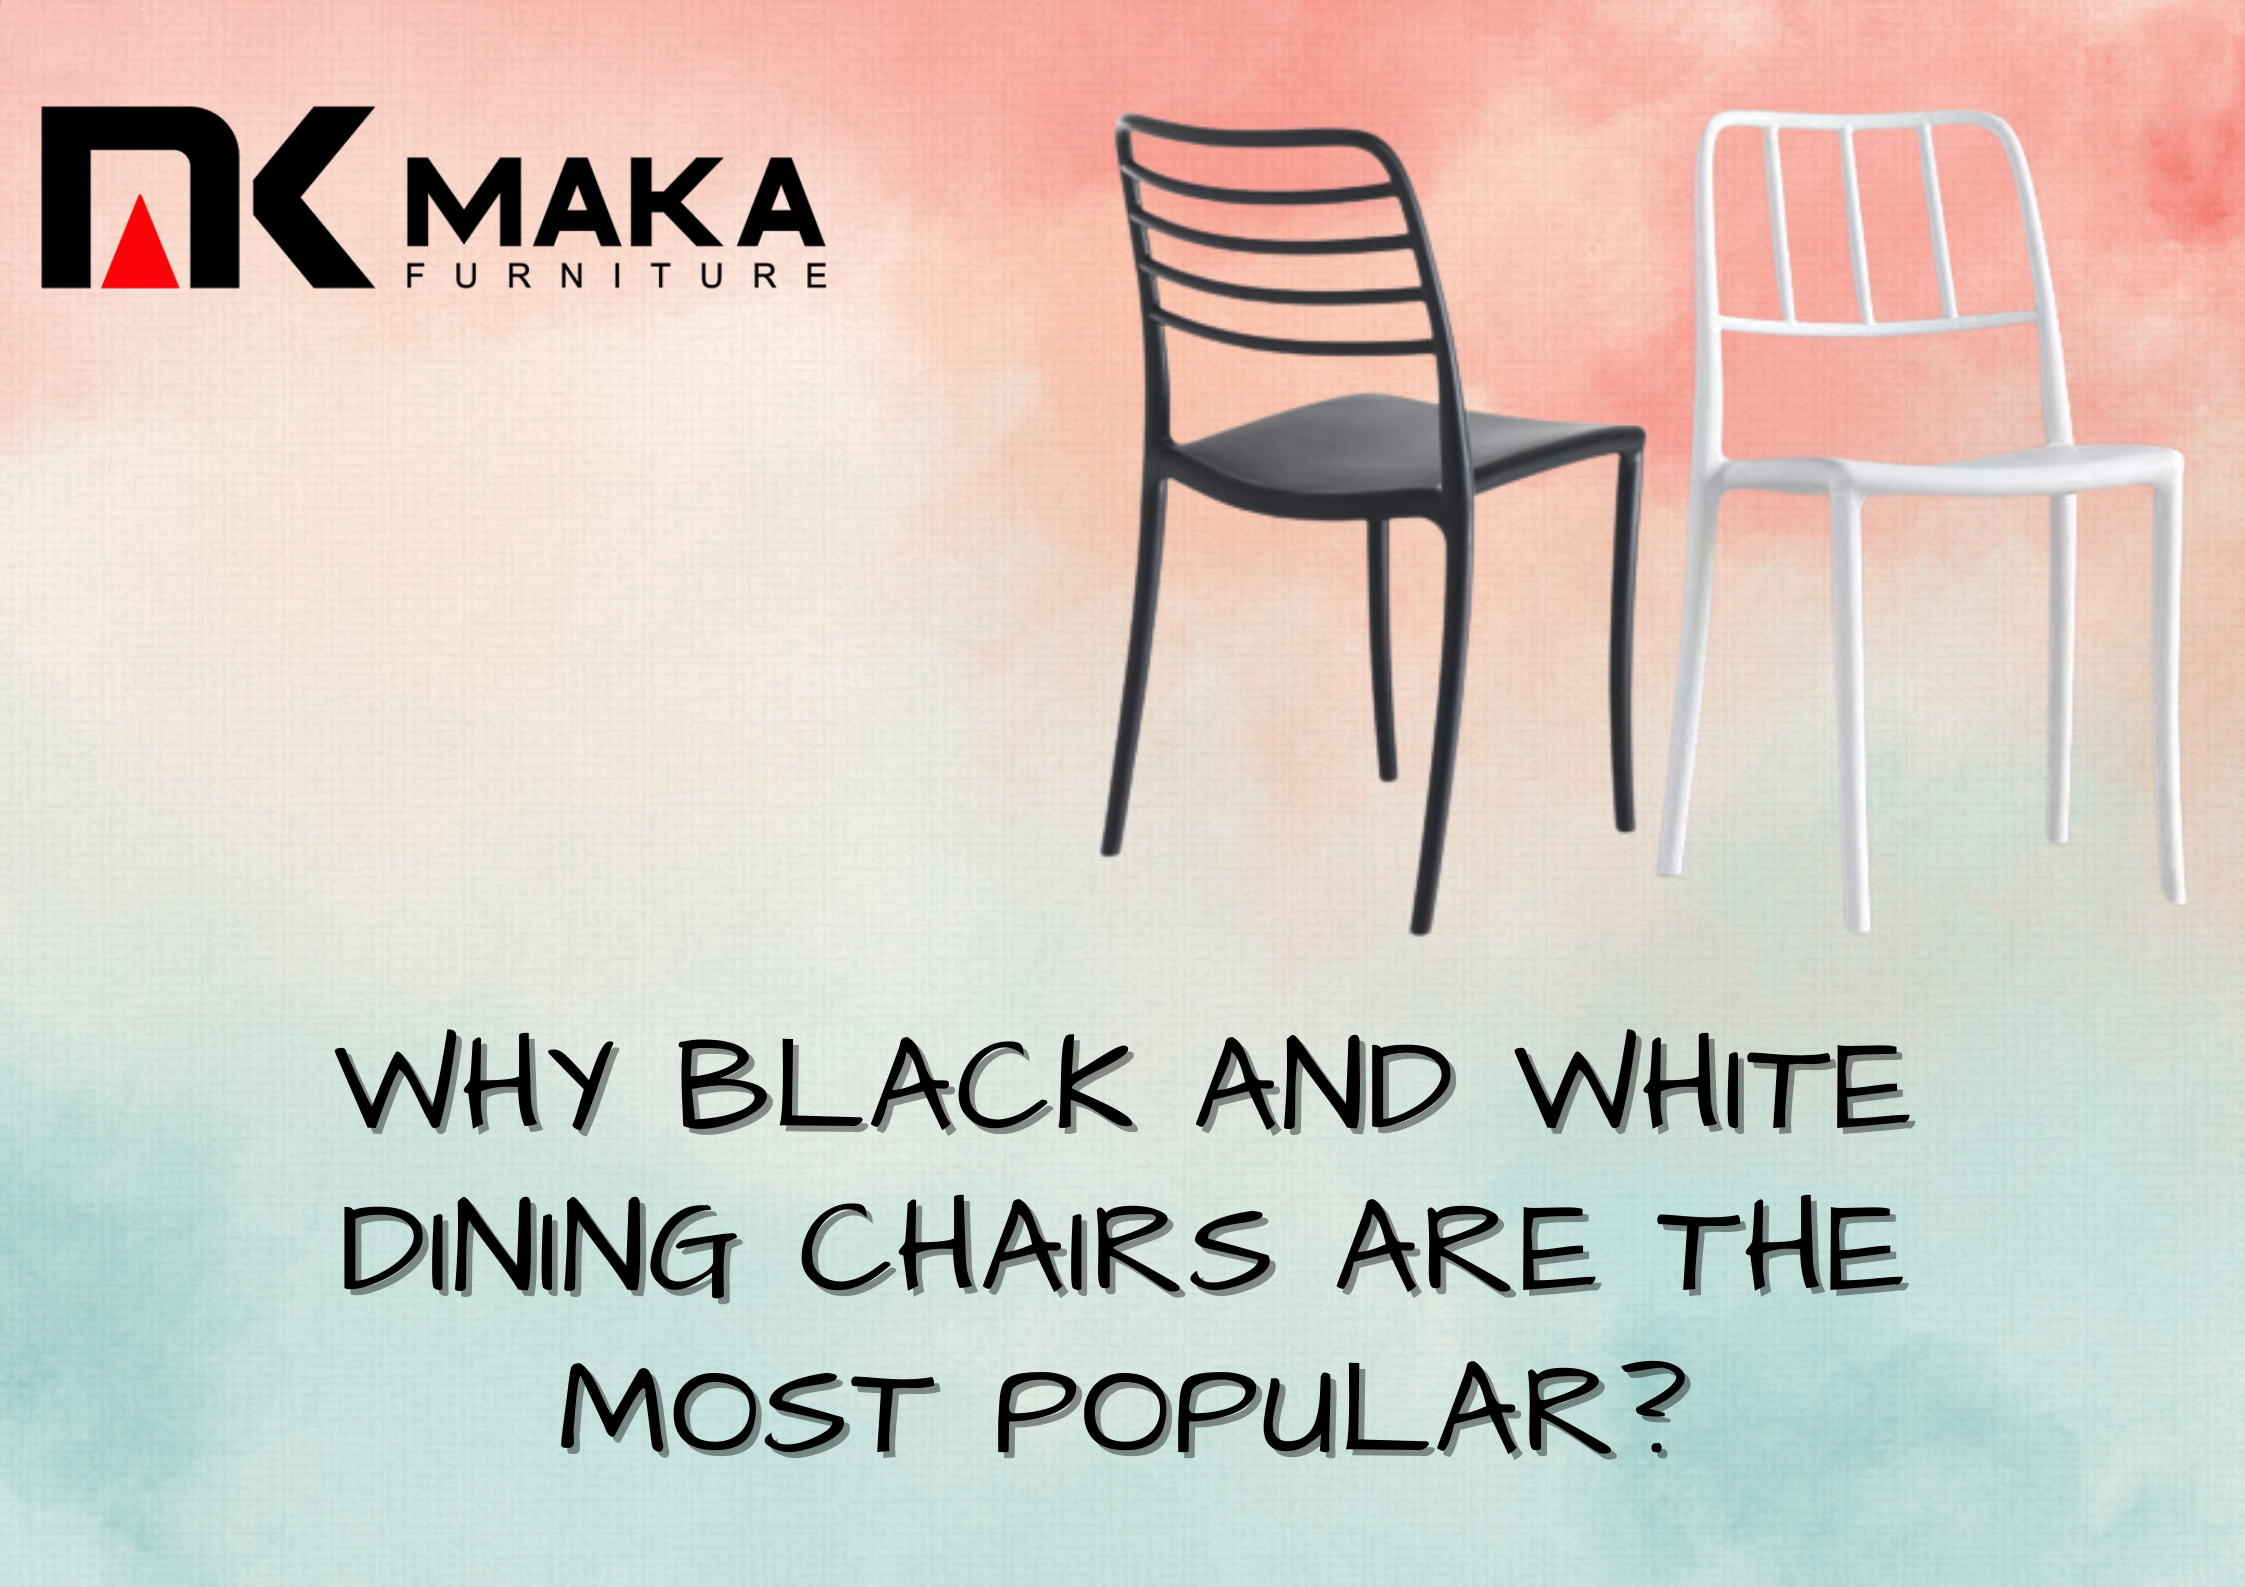 Why black and white dining chairs are the most popular